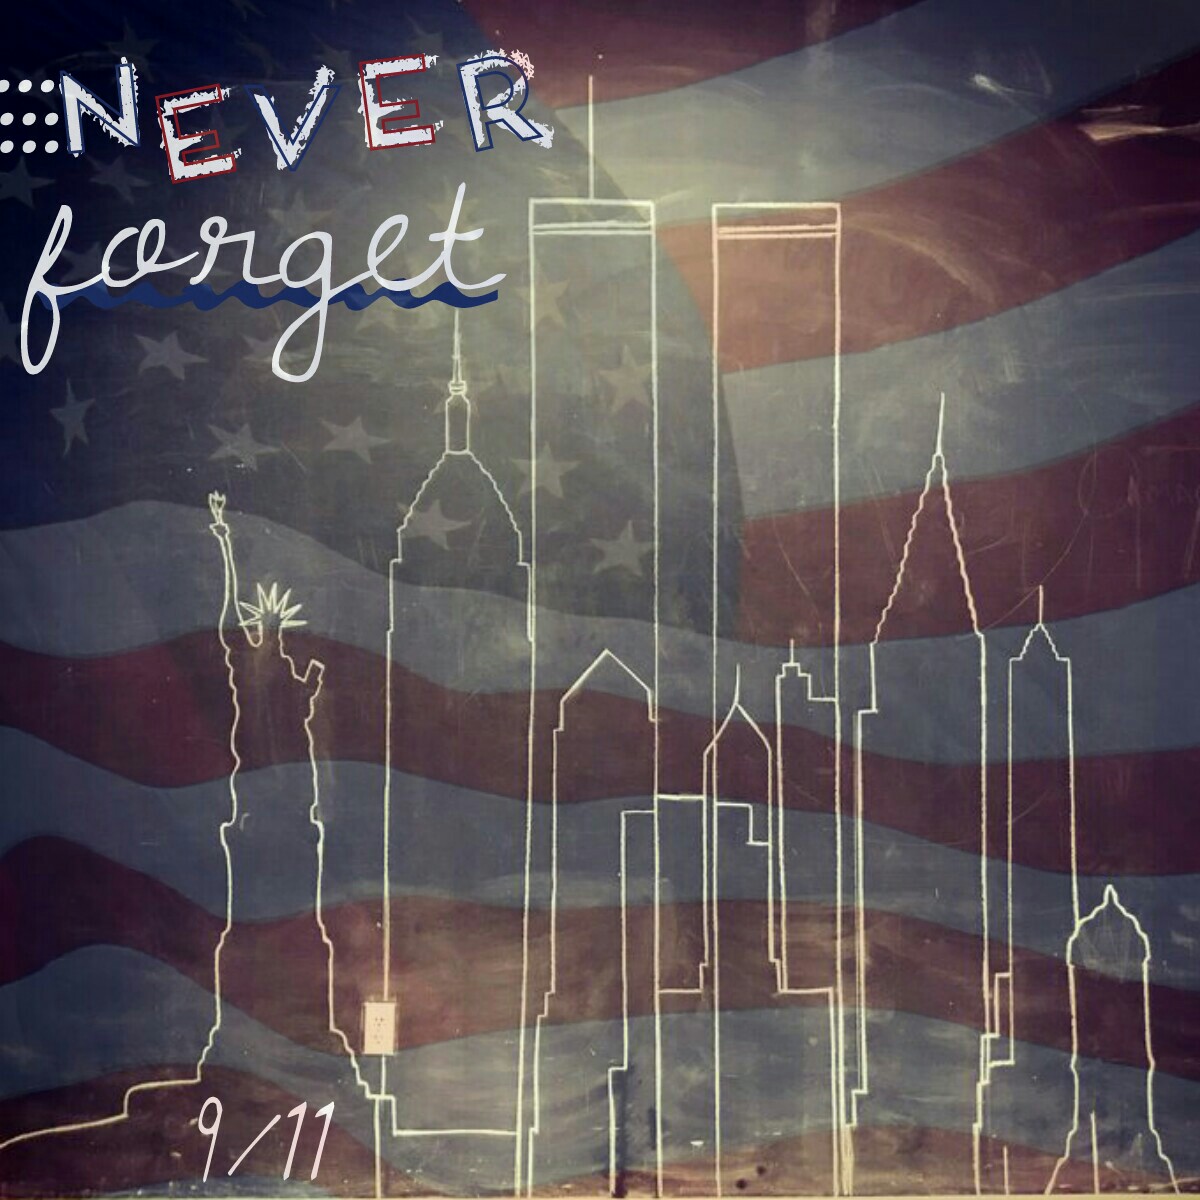 Plz never forget the victims of the 9/11 attacks! Tap! 💕
Sorry no QOTD instead plz take a moment of silence for the victims ❤